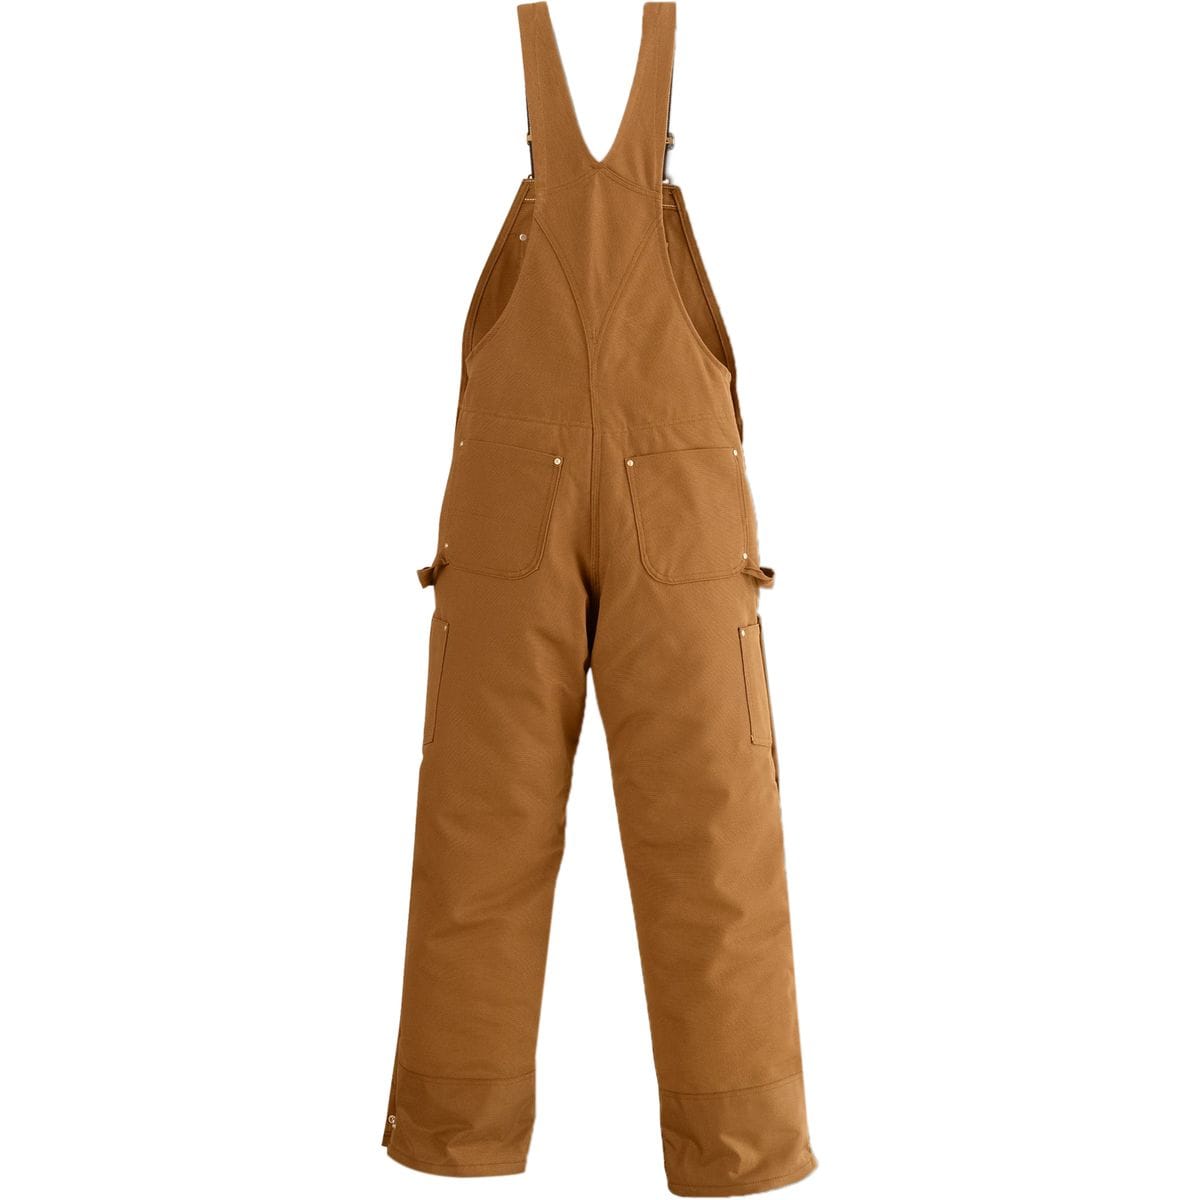 Carhartt Quilt-Lined Zip-To-Thigh Bib Overall Pant - Men's ...